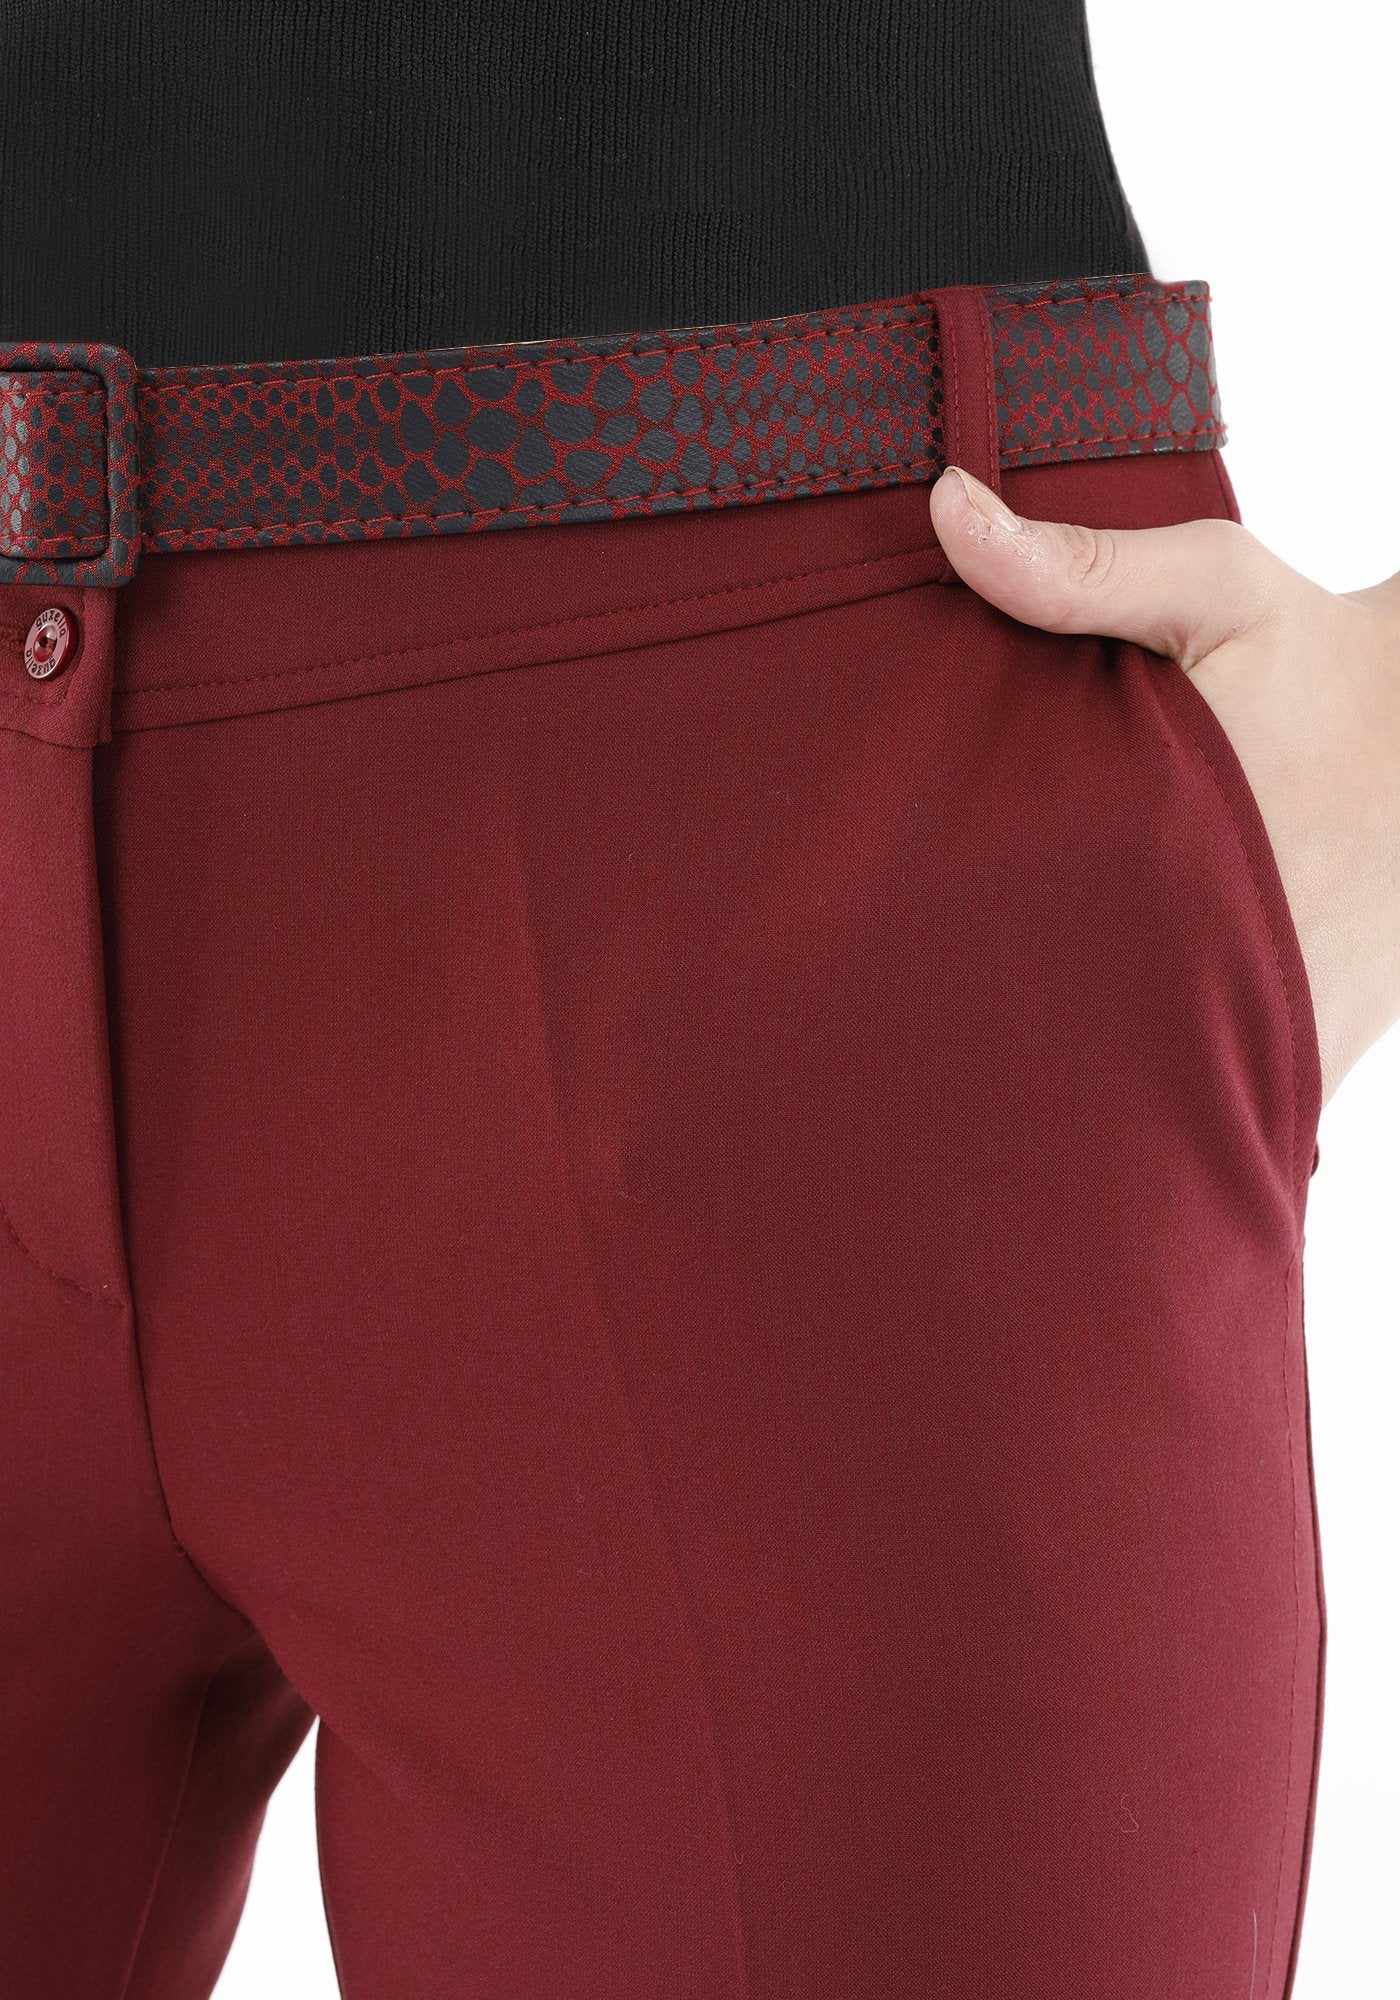 Guzella Slim Fit Ankle Length Women's Burgundy Pants with Buttons and Leather Details Guzella